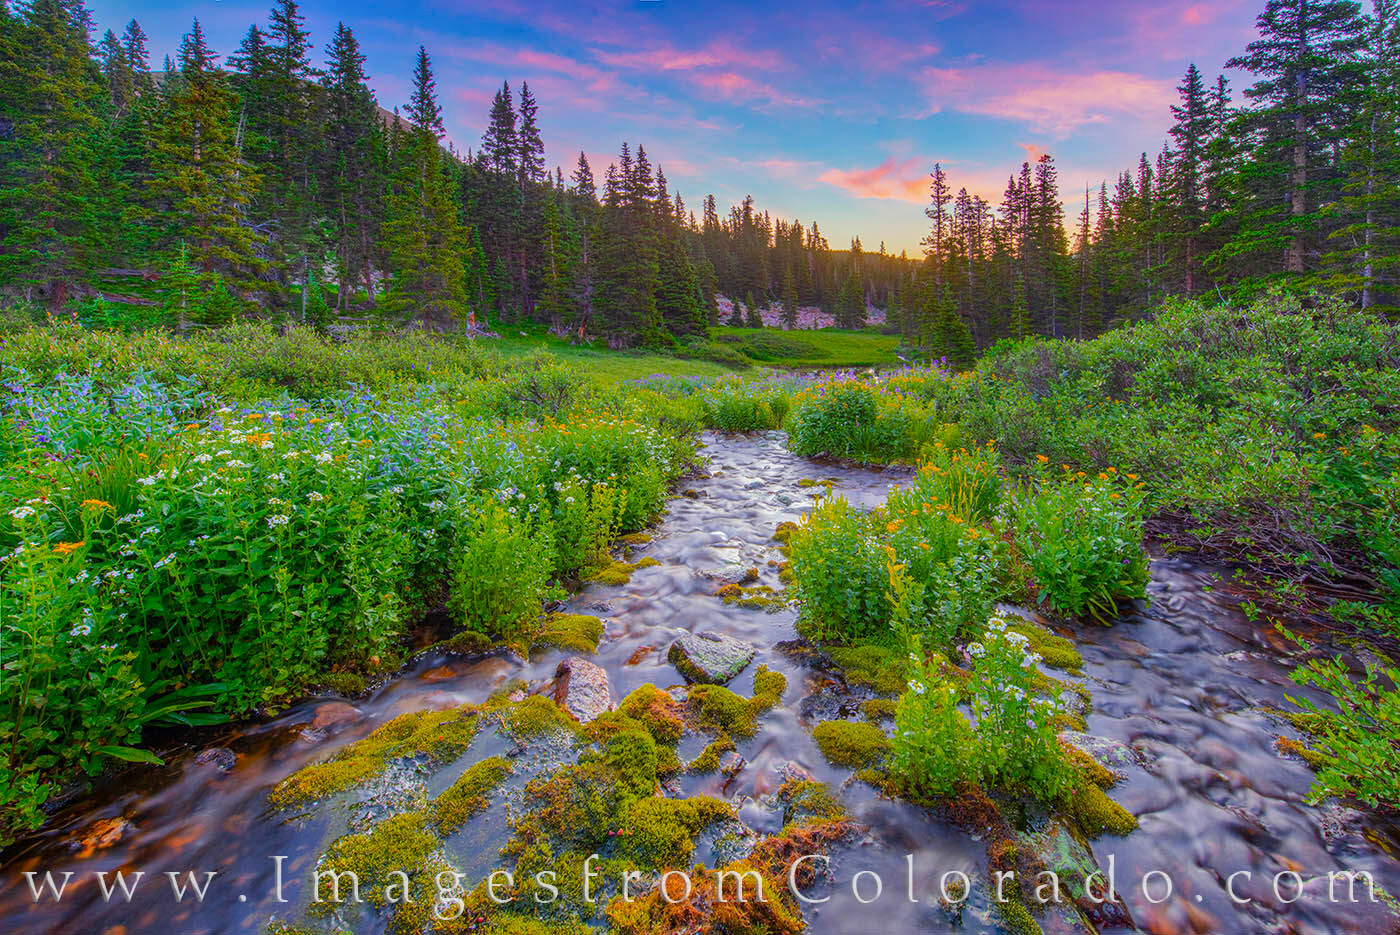 The colors of a summer morning were evident in this scene high above Hwy 40 near Berthoud Pass. The sky was filled with hues...